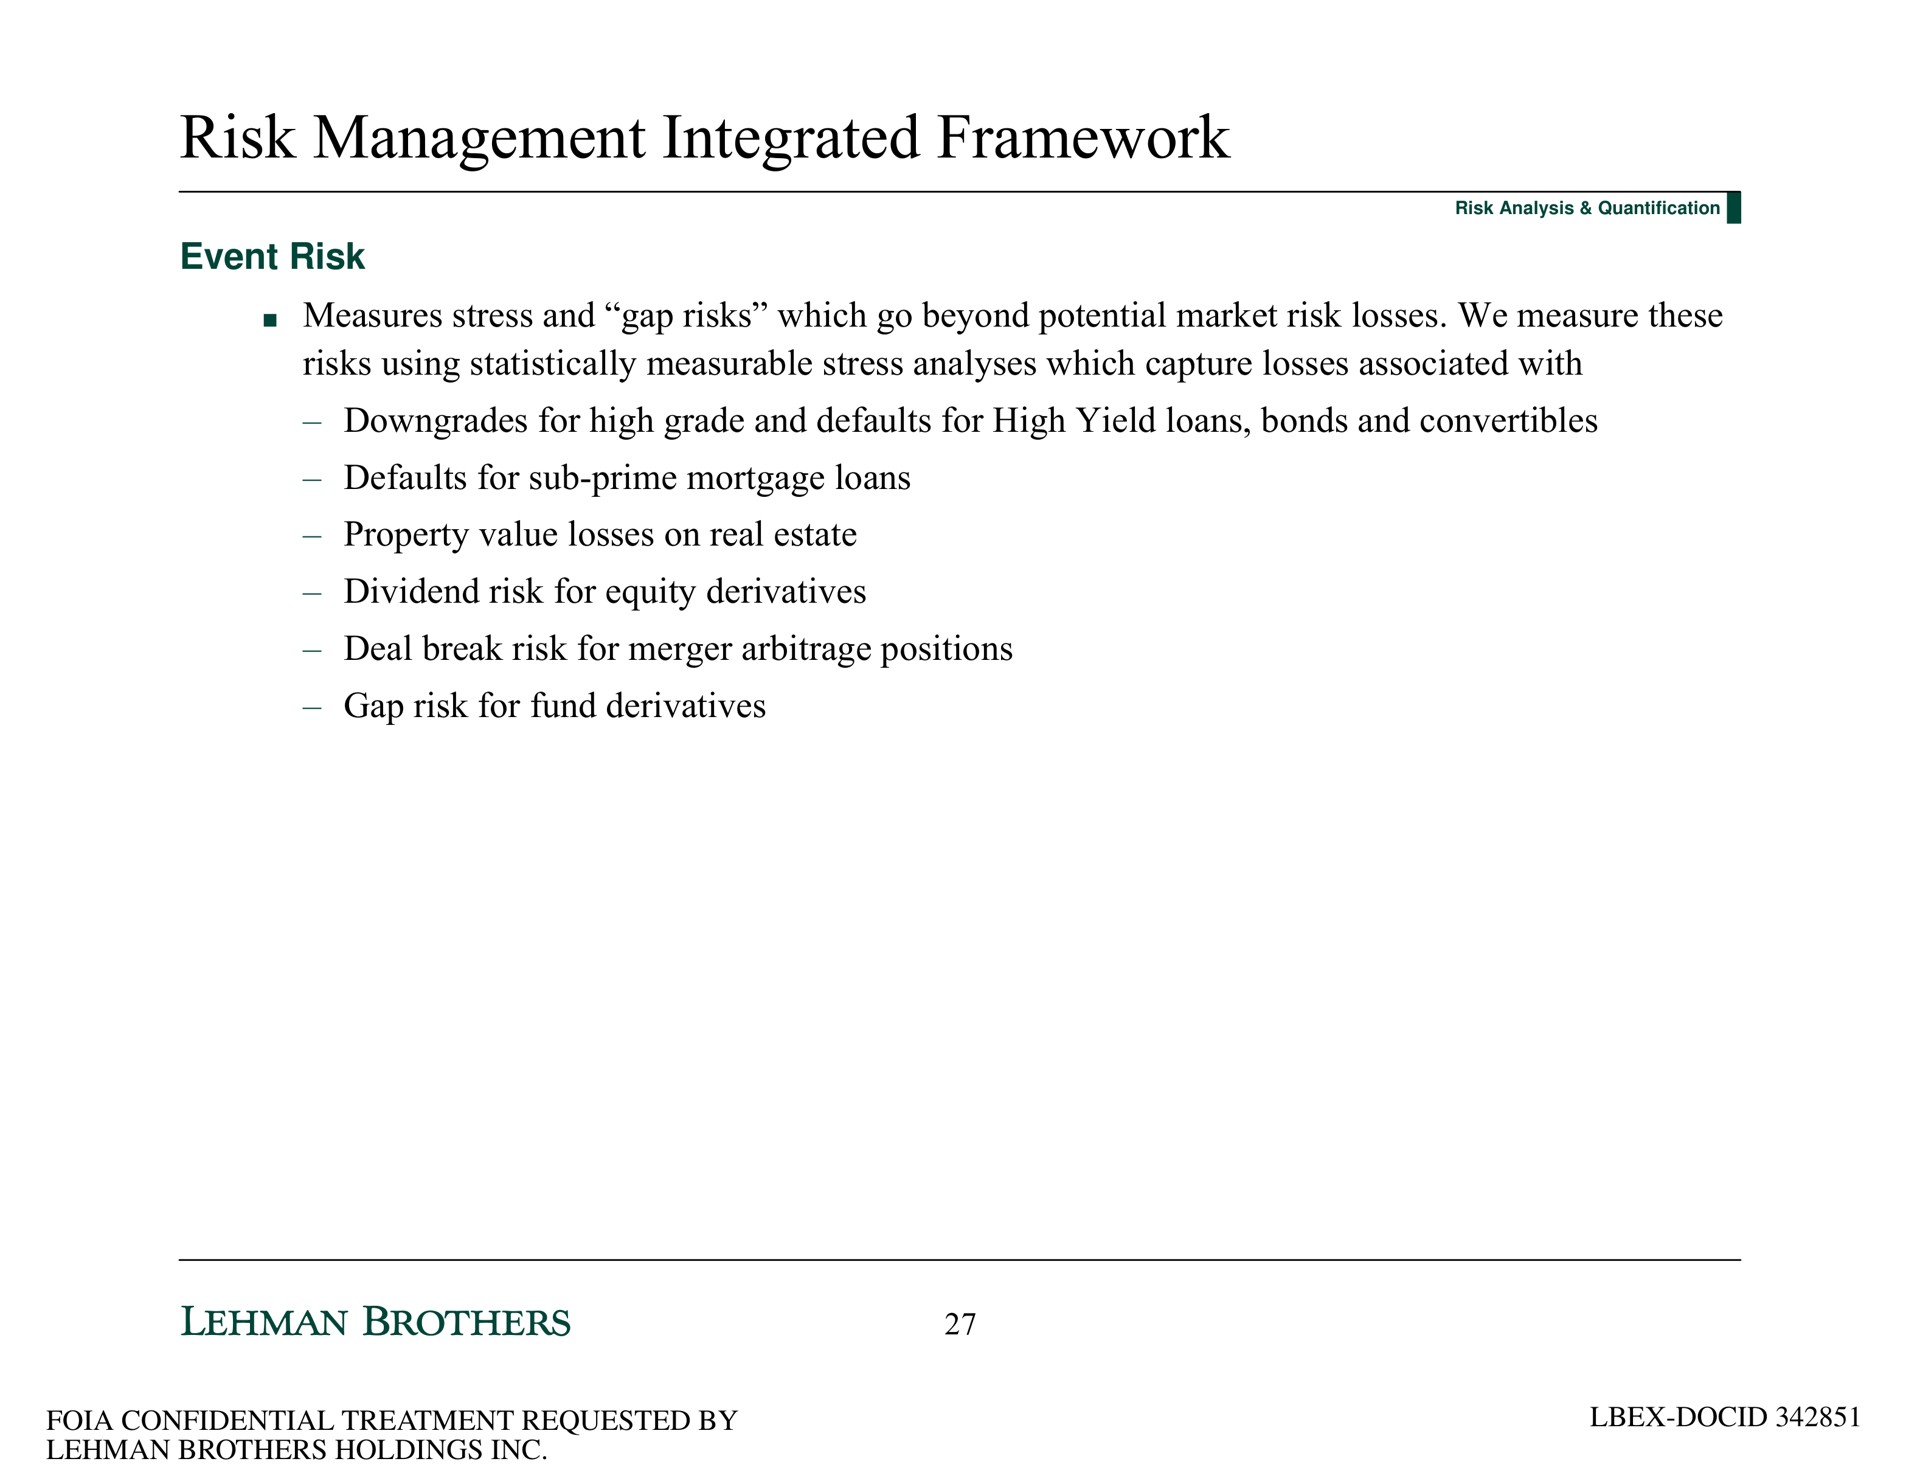 risk management integrated framework event risk measures stress and gap risks which go beyond potential market risk losses we measure these risks using statistically measurable stress analyses which capture losses associated with downgrades for high grade and defaults for high yield loans bonds and convertibles defaults for sub prime mortgage loans property value losses on real estate dividend risk for equity derivatives deal break risk for merger positions gap risk for fund derivatives | Lehman Brothers